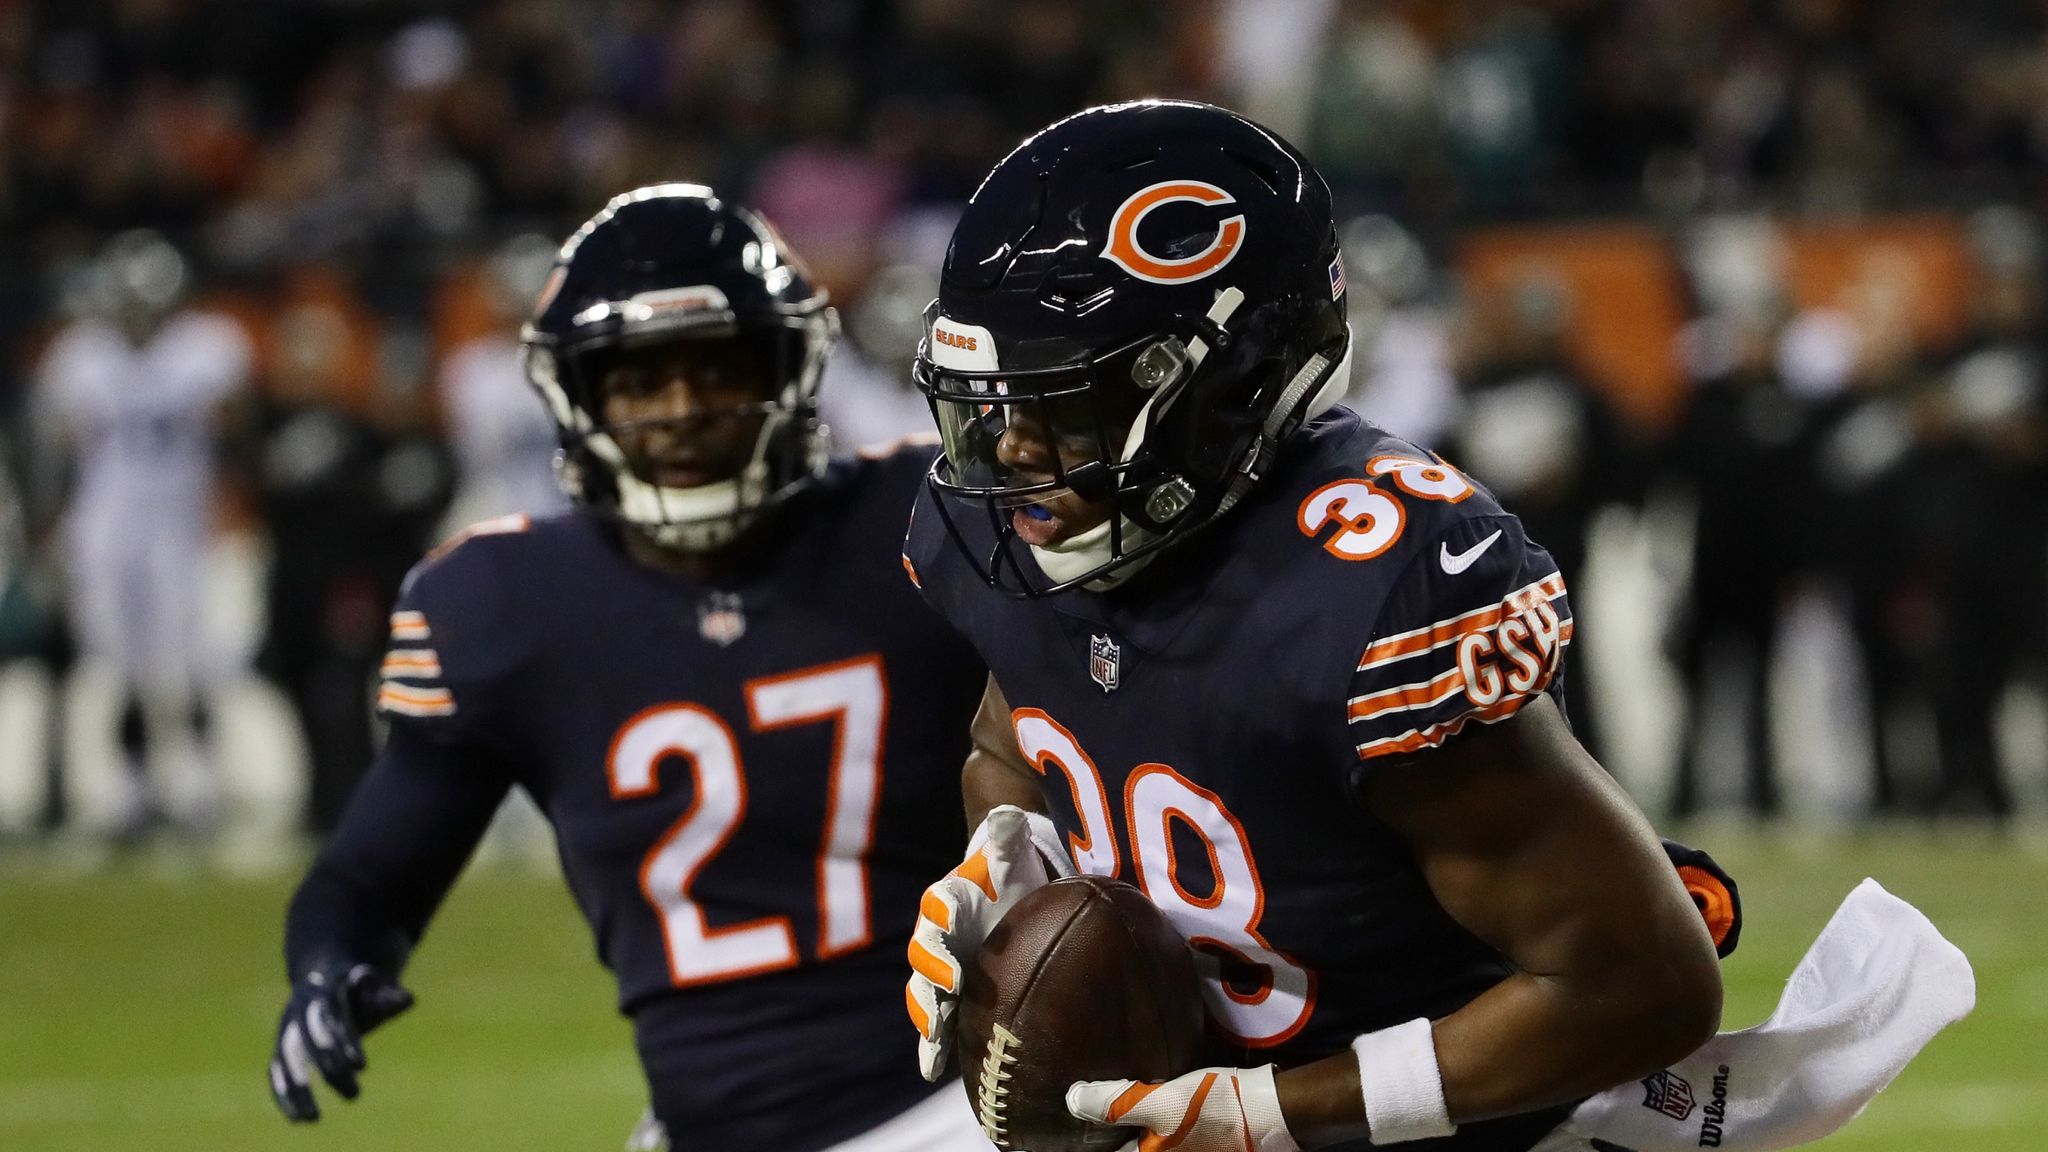 REPORT: Former Packer Adrian Amos signs with Jets